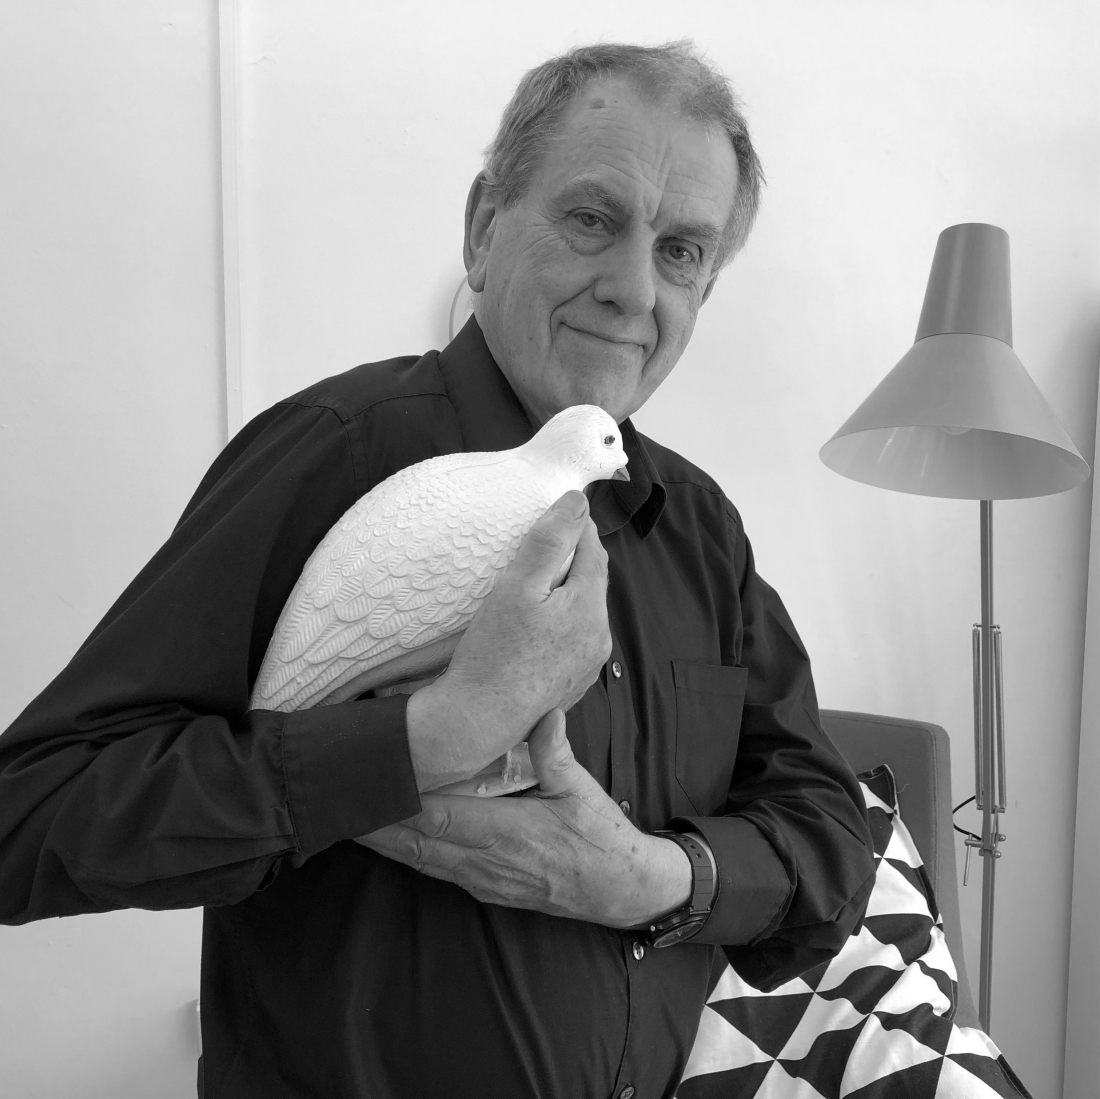 Peter Standing - Architect & Founder